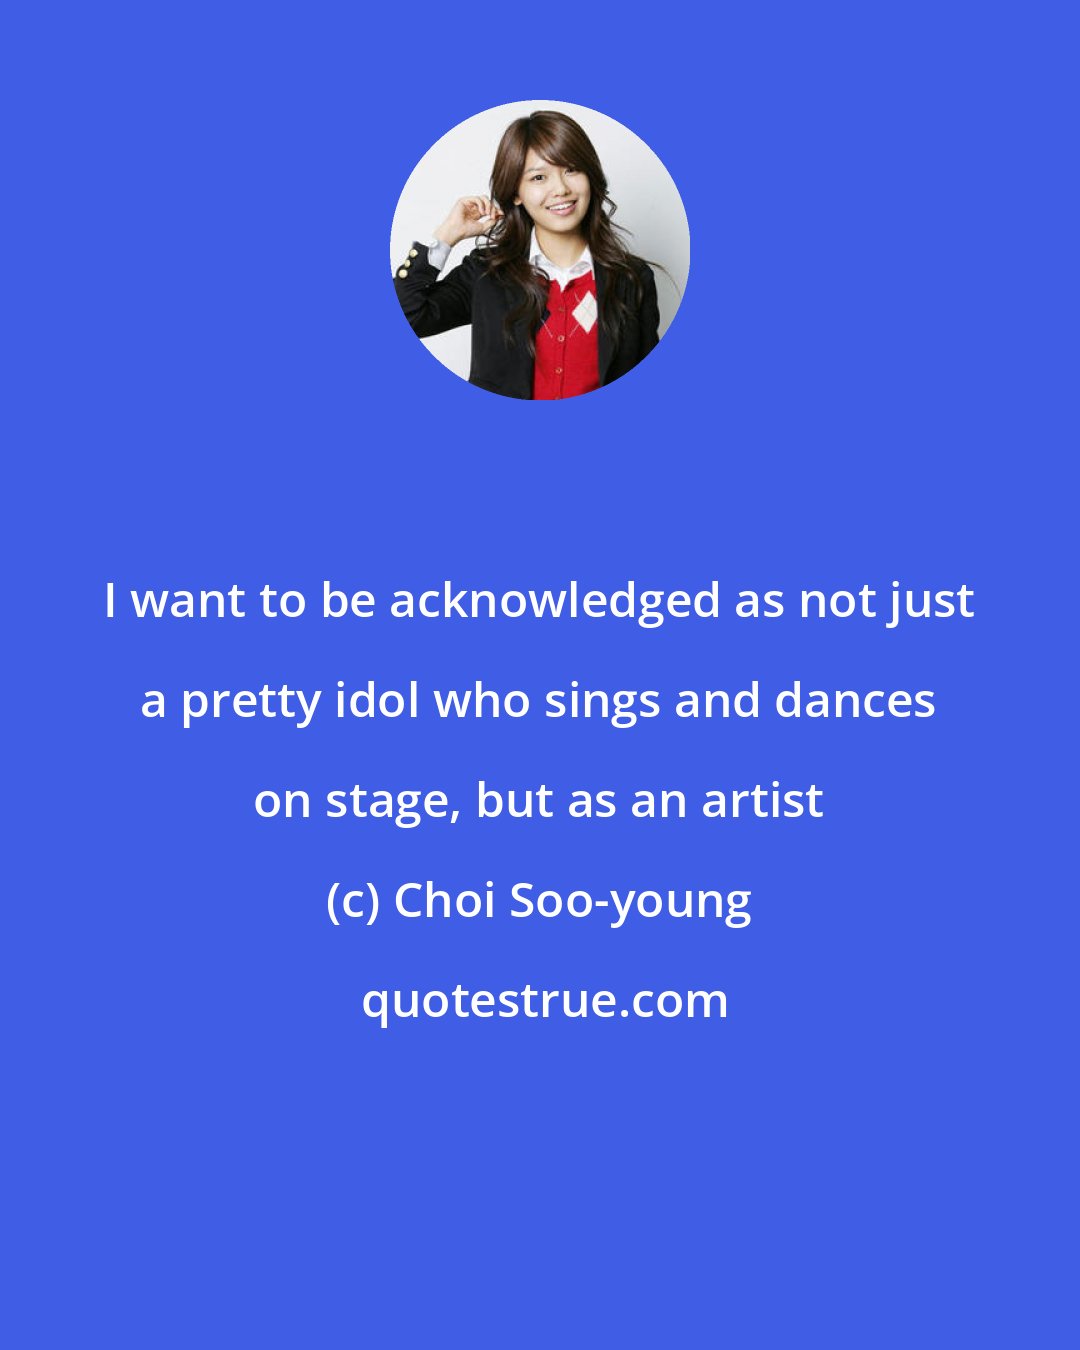 Choi Soo-young: I want to be acknowledged as not just a pretty idol who sings and dances on stage, but as an artist